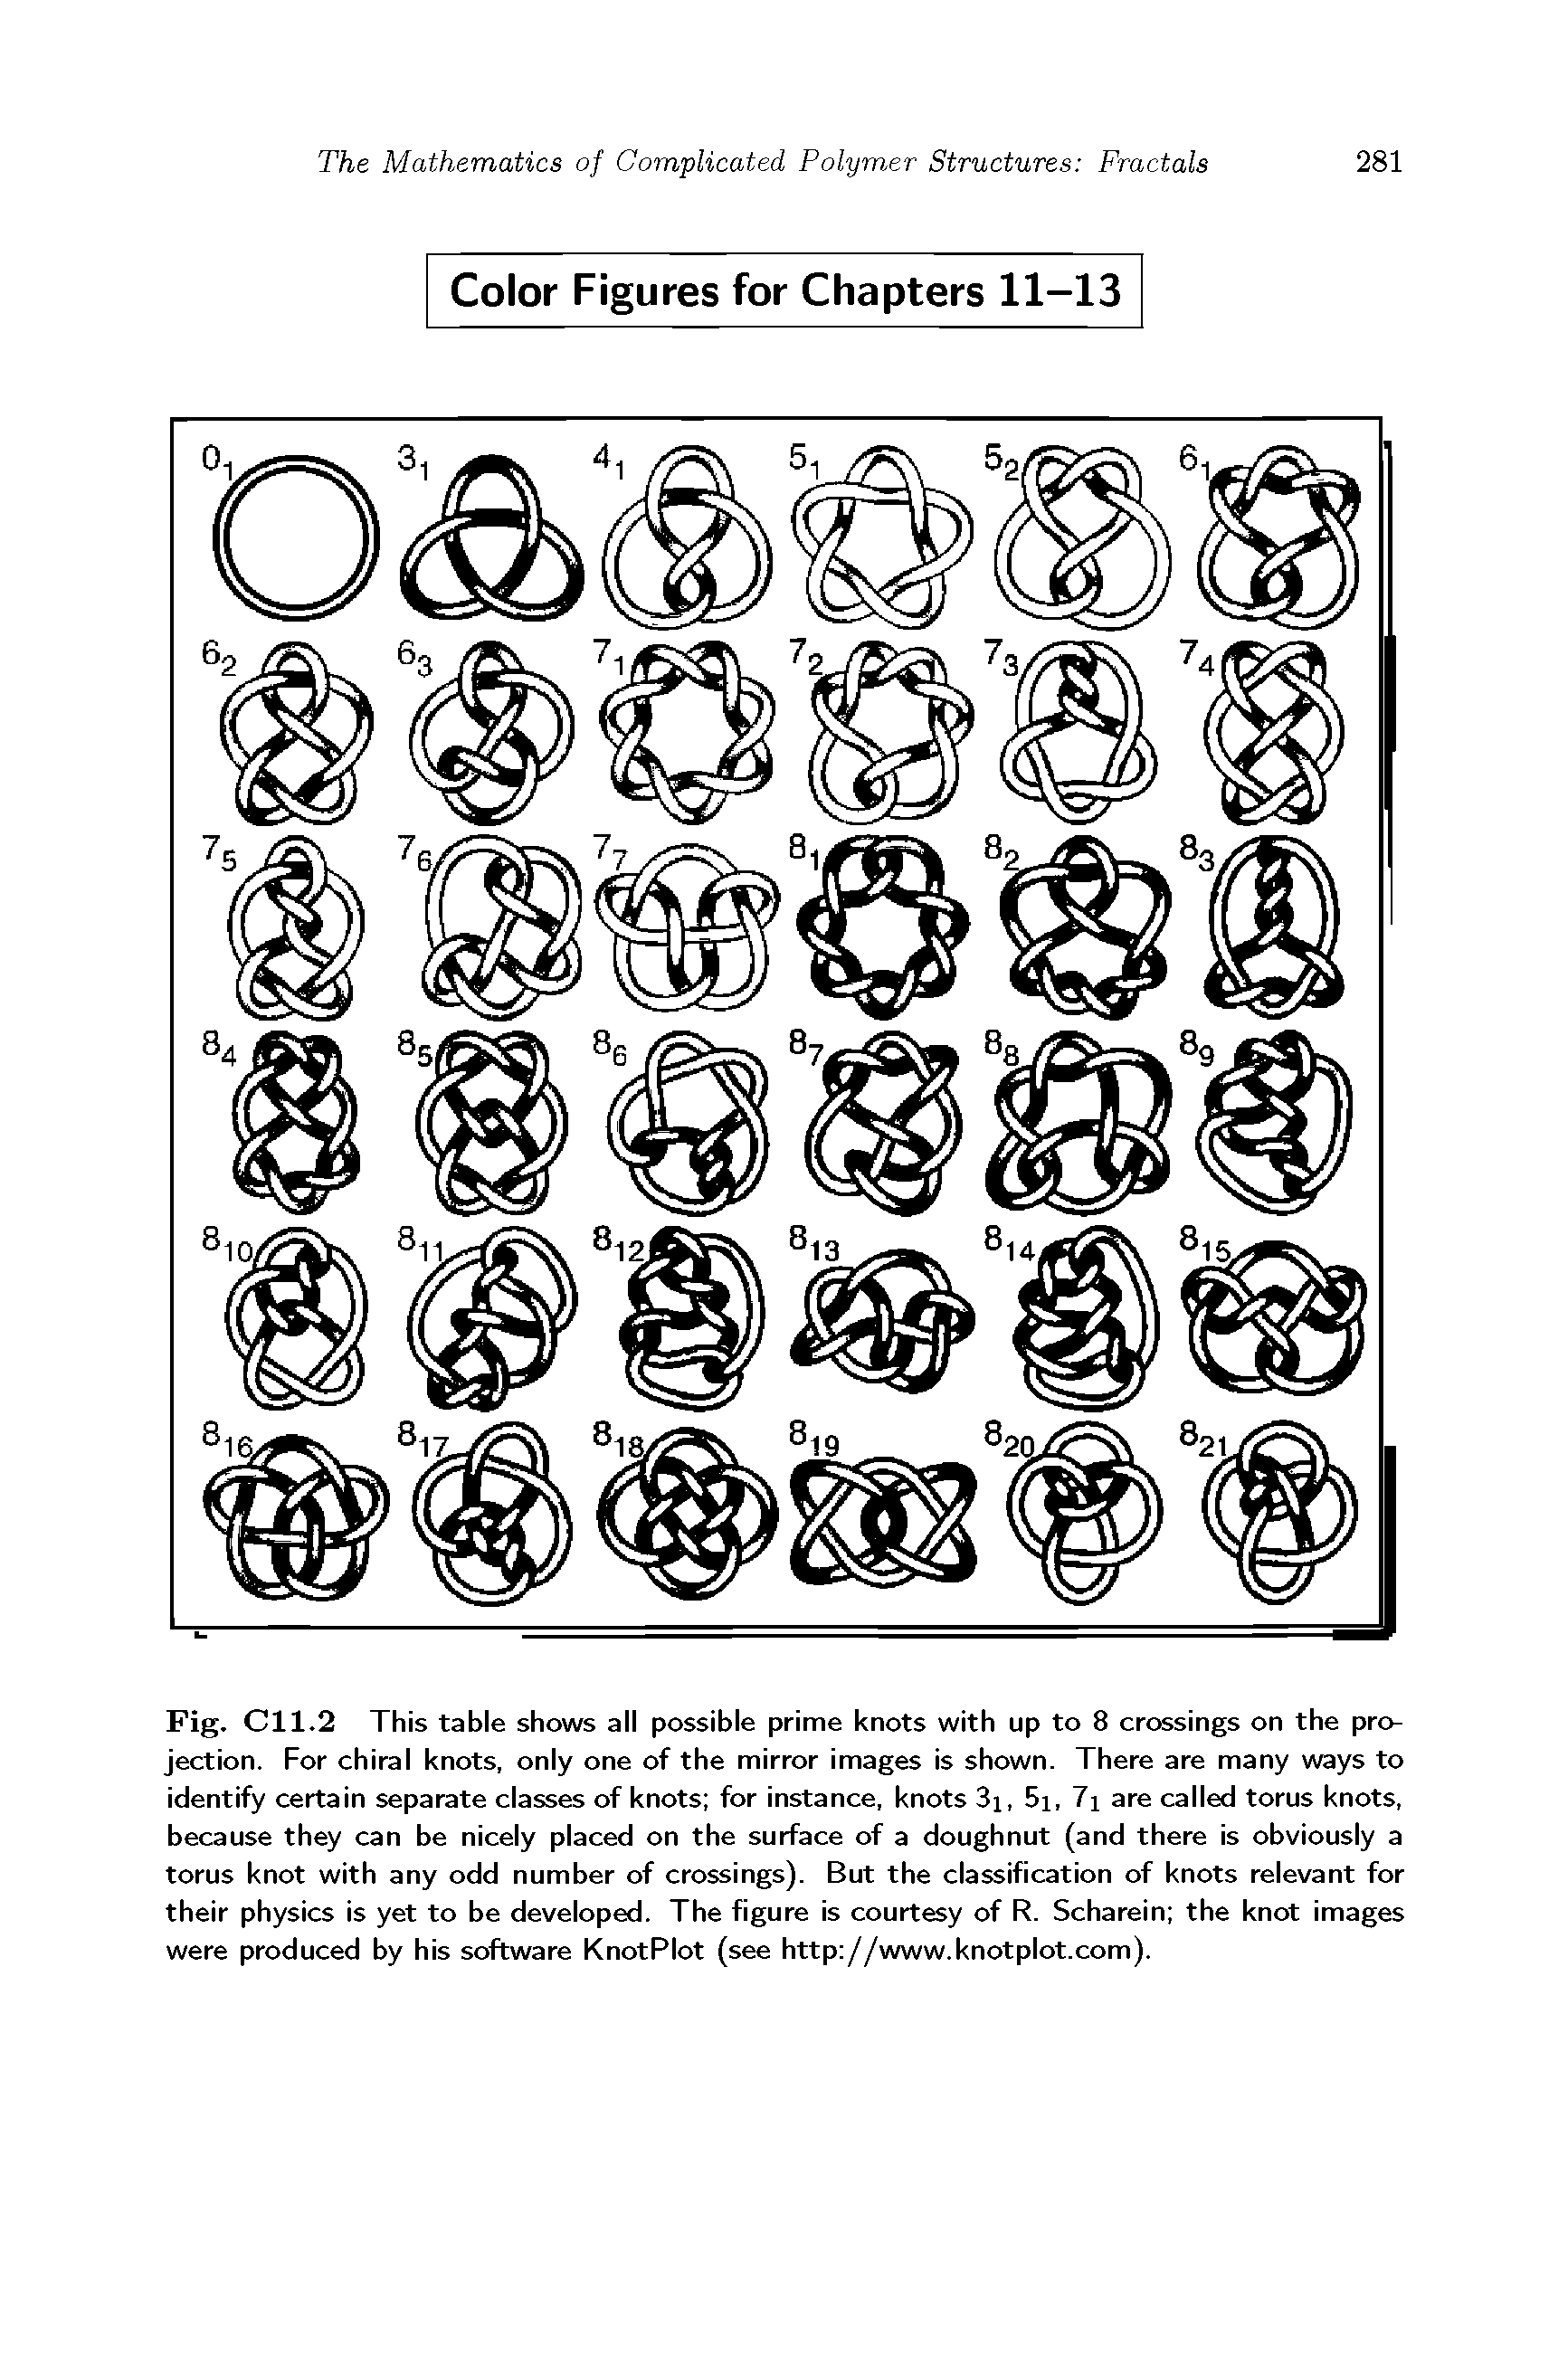 Fig. C11.2 This table shows all possible prime knots with up to 8 crossings on the projection. For chiral knots, only one of the mirror images is shown. There are many ways to identify certain separate classes of knots for instance, knots 3i, 5i, 7i are called torus knots, because they can be nicely placed on the surface of a doughnut (and there is obviously a torus knot with any odd number of crossings). But the classification of knots relevant for their physics is yet to be developed. The figure is courtesy of R. Scharein the knot images were produced by his software KnotPlot (see http //www.knotplot.com).